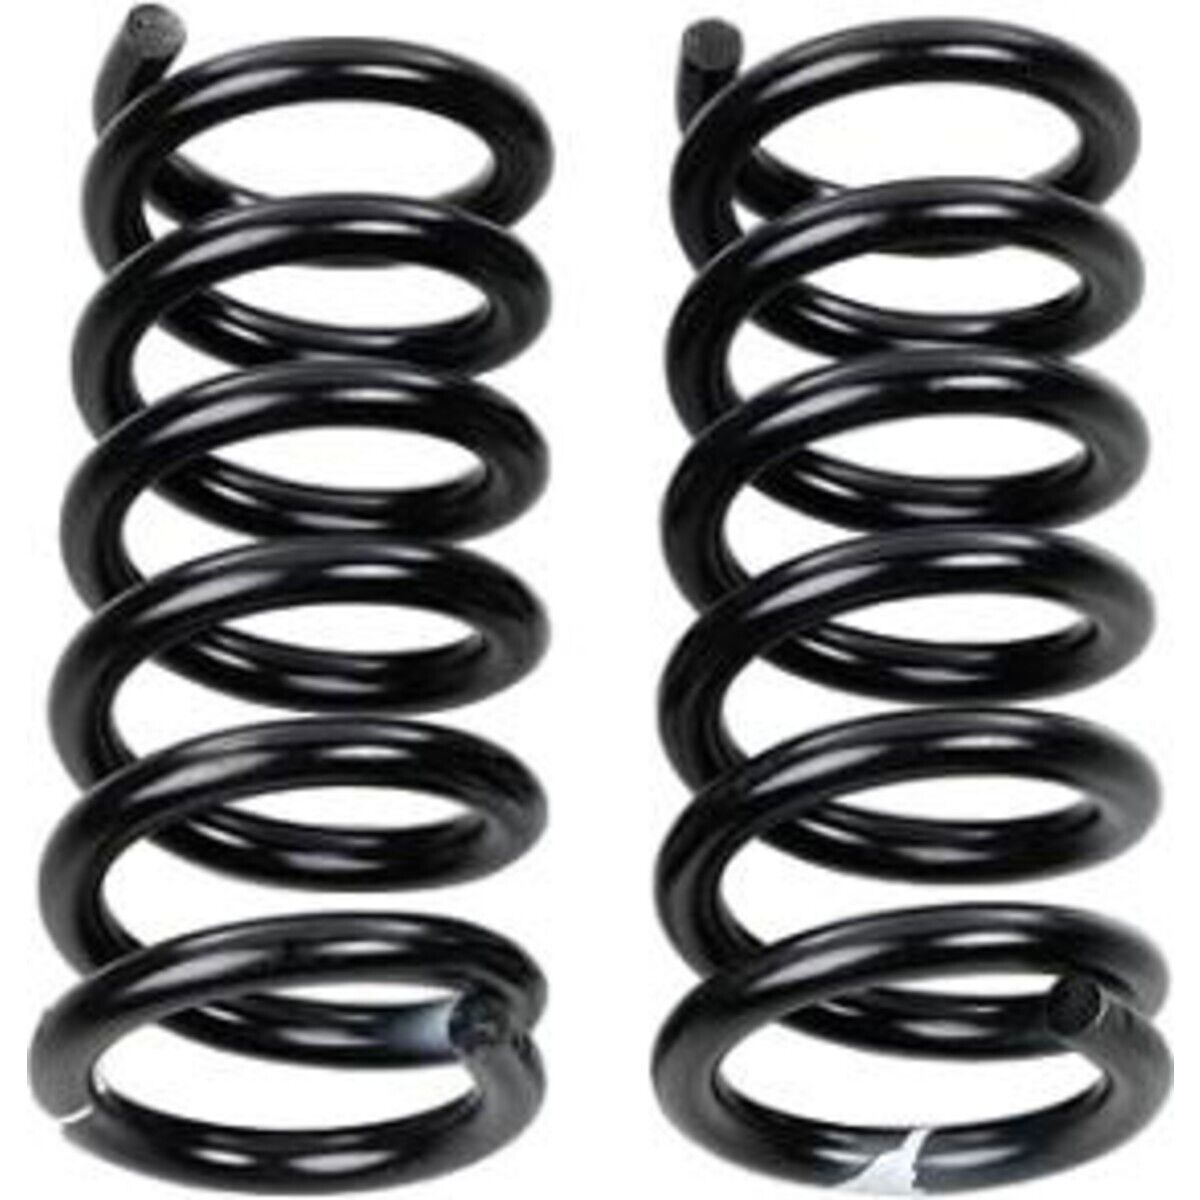 5662 Moog Set of 2 Coil Springs Front for Chevy S10 Pickup S-10 BLAZER S15 Pair